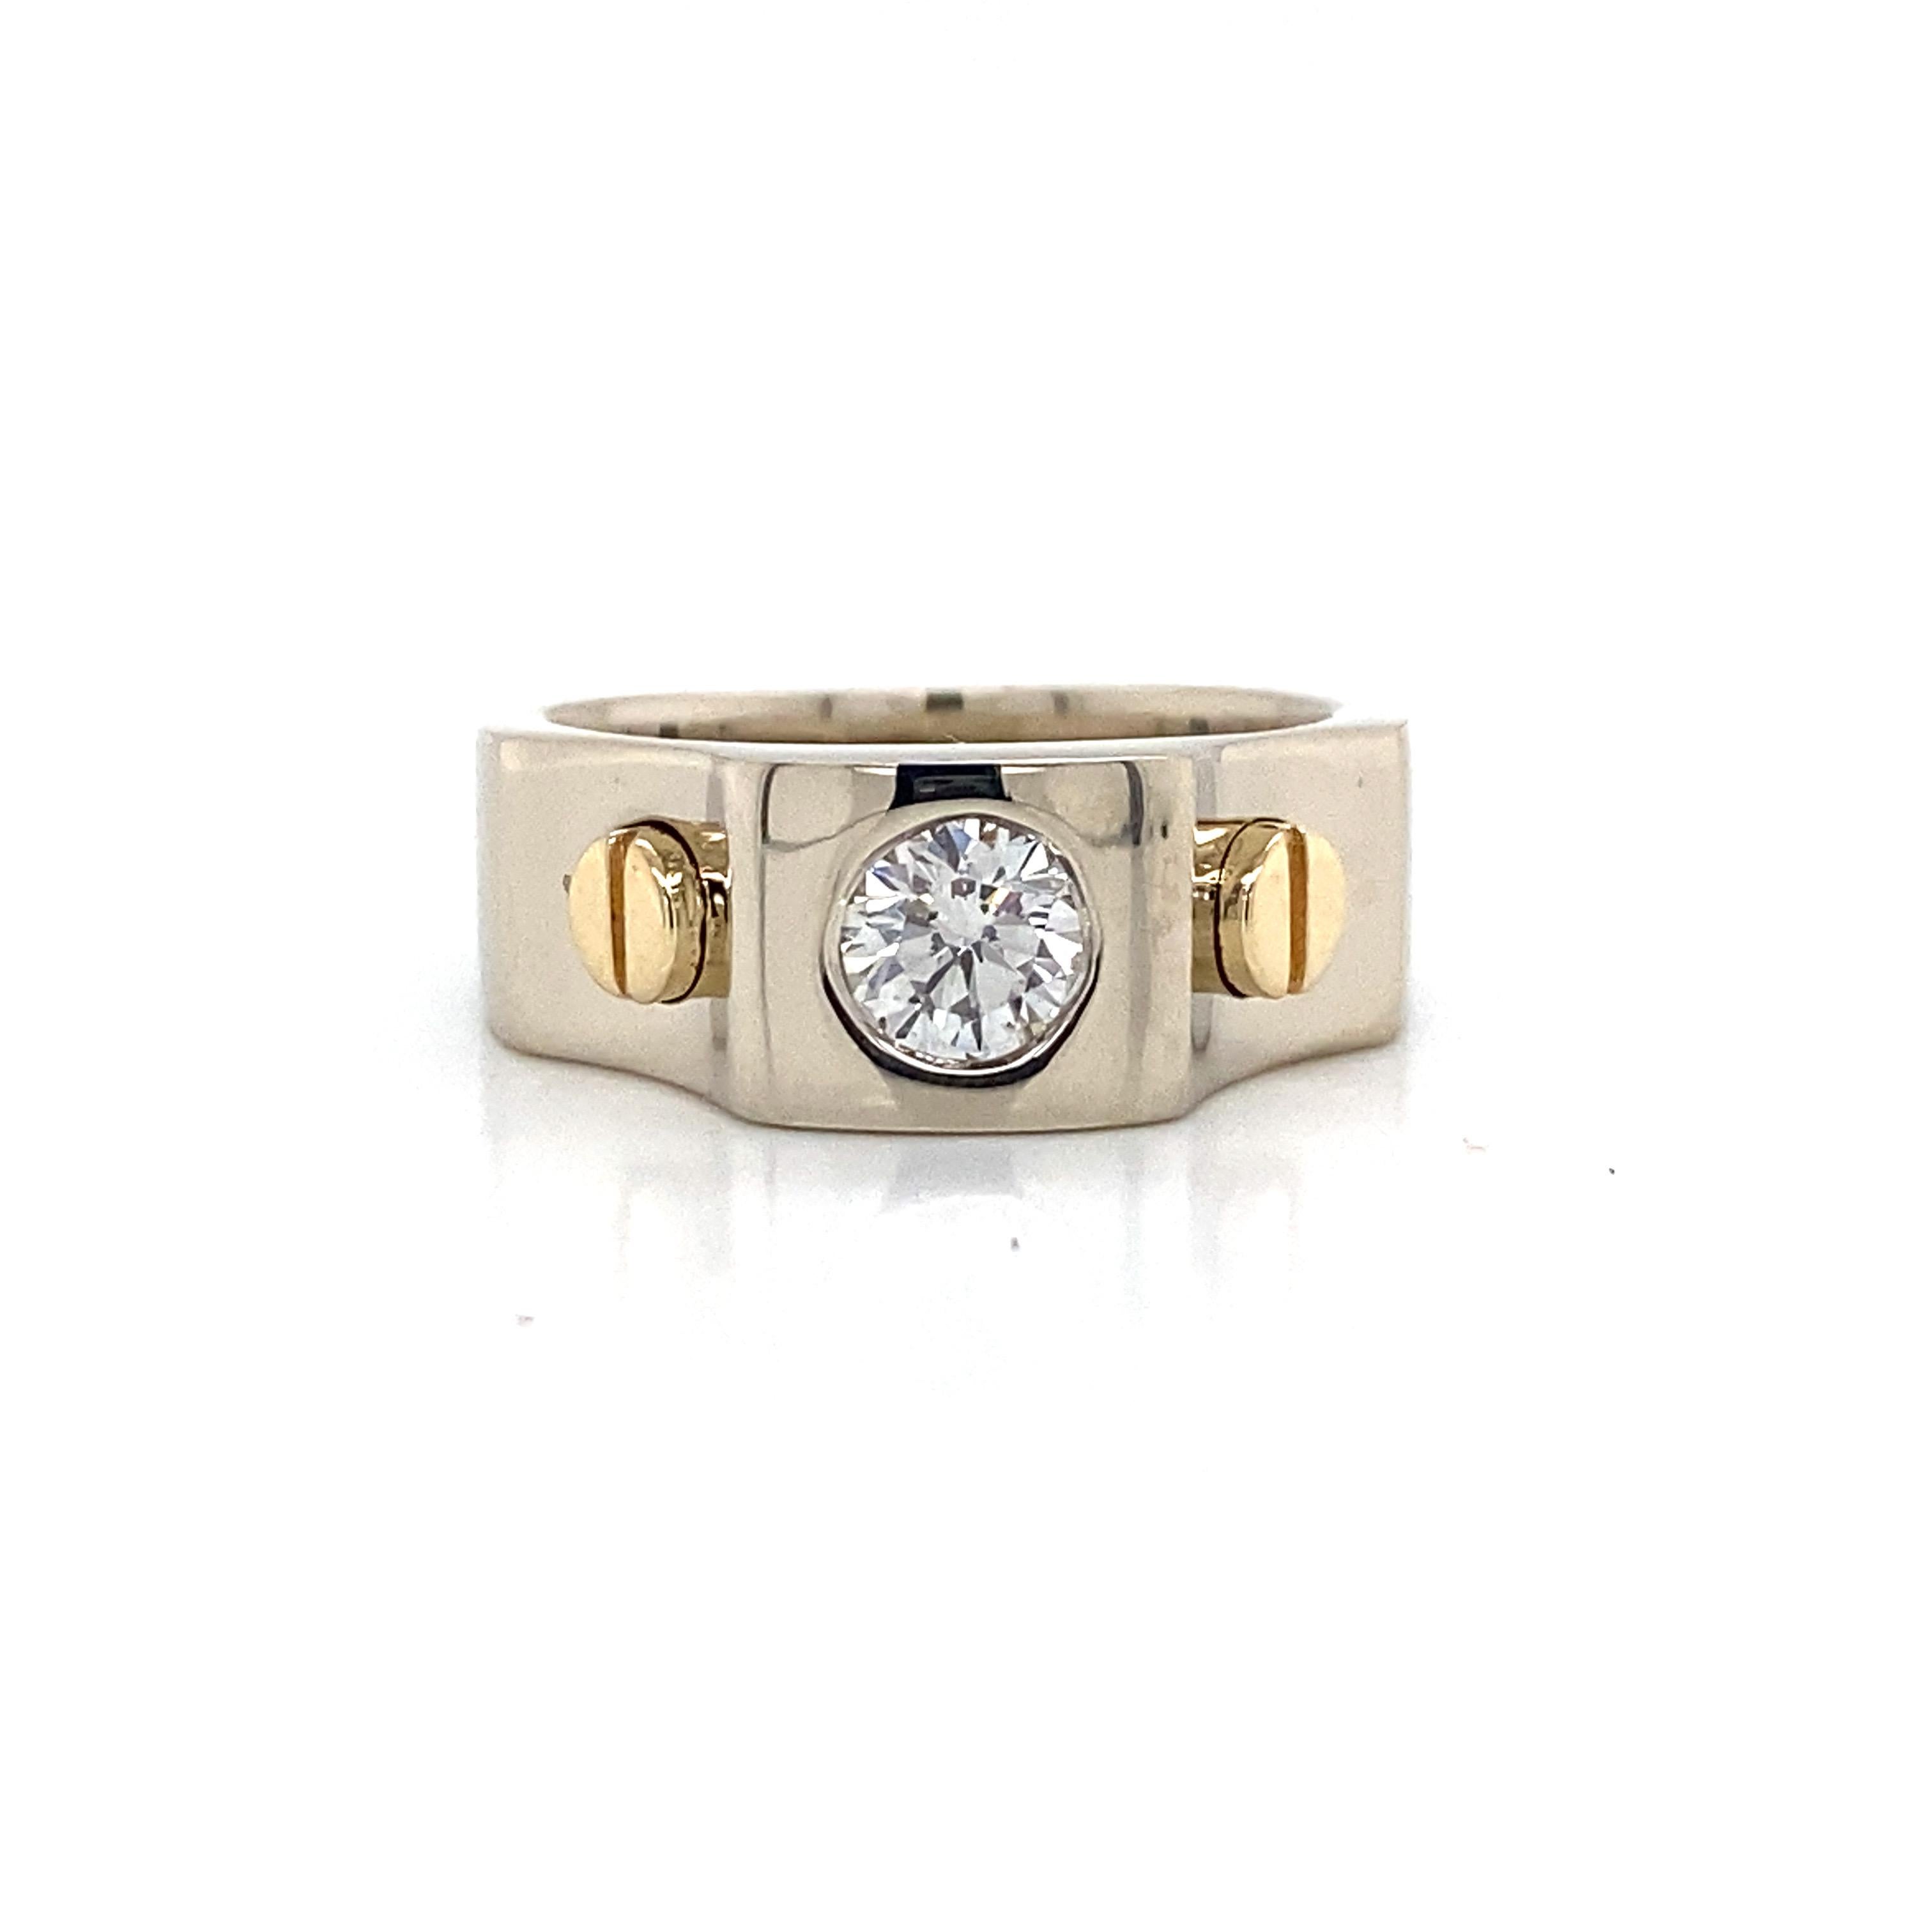 Diamond Solitaire 14K Yellow Gold Gents Band Ring.  (1) Round Brilliant Cut Diamond weighing 0.75 carat total weight, G-I in color and VS in clarity is expertly set.  The Band measures 5/16 inch in width. Ring size 7.5. 11.9 grams.